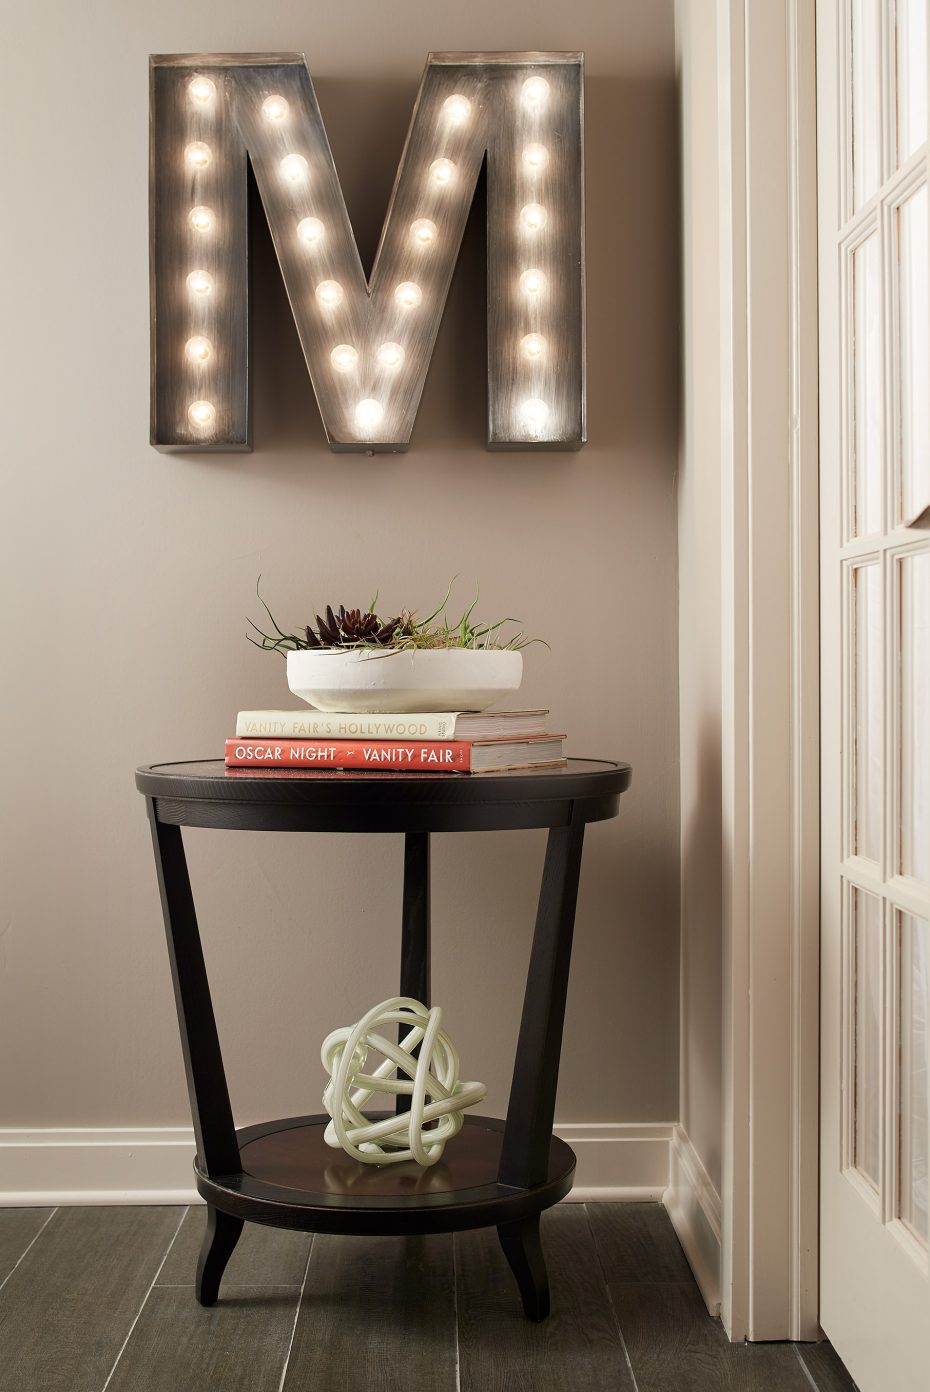 Large letter M in lights above a Hickory Chair wood table